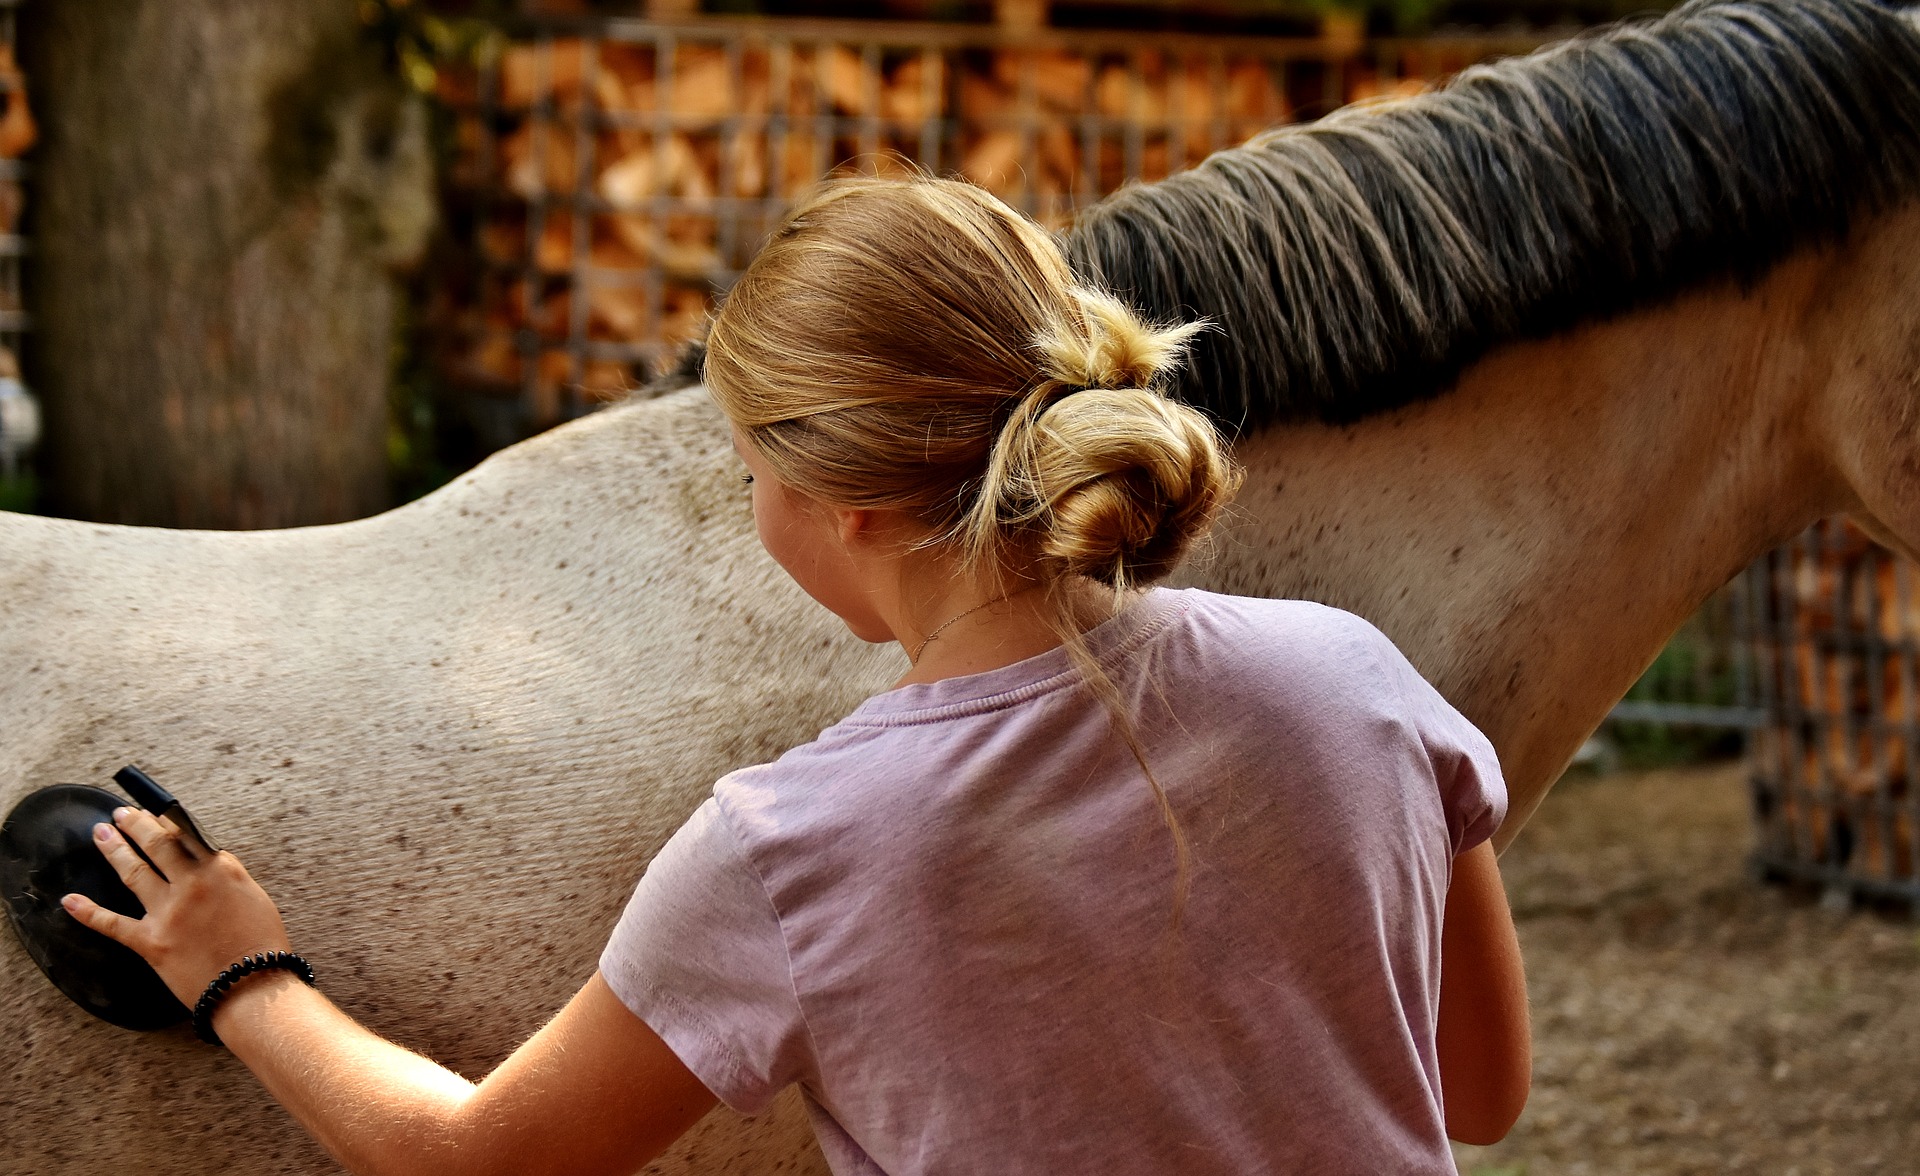 Keeping your horse well-groomed is important for their health. Learn what you should do in this quick guide to horse grooming for beginners.